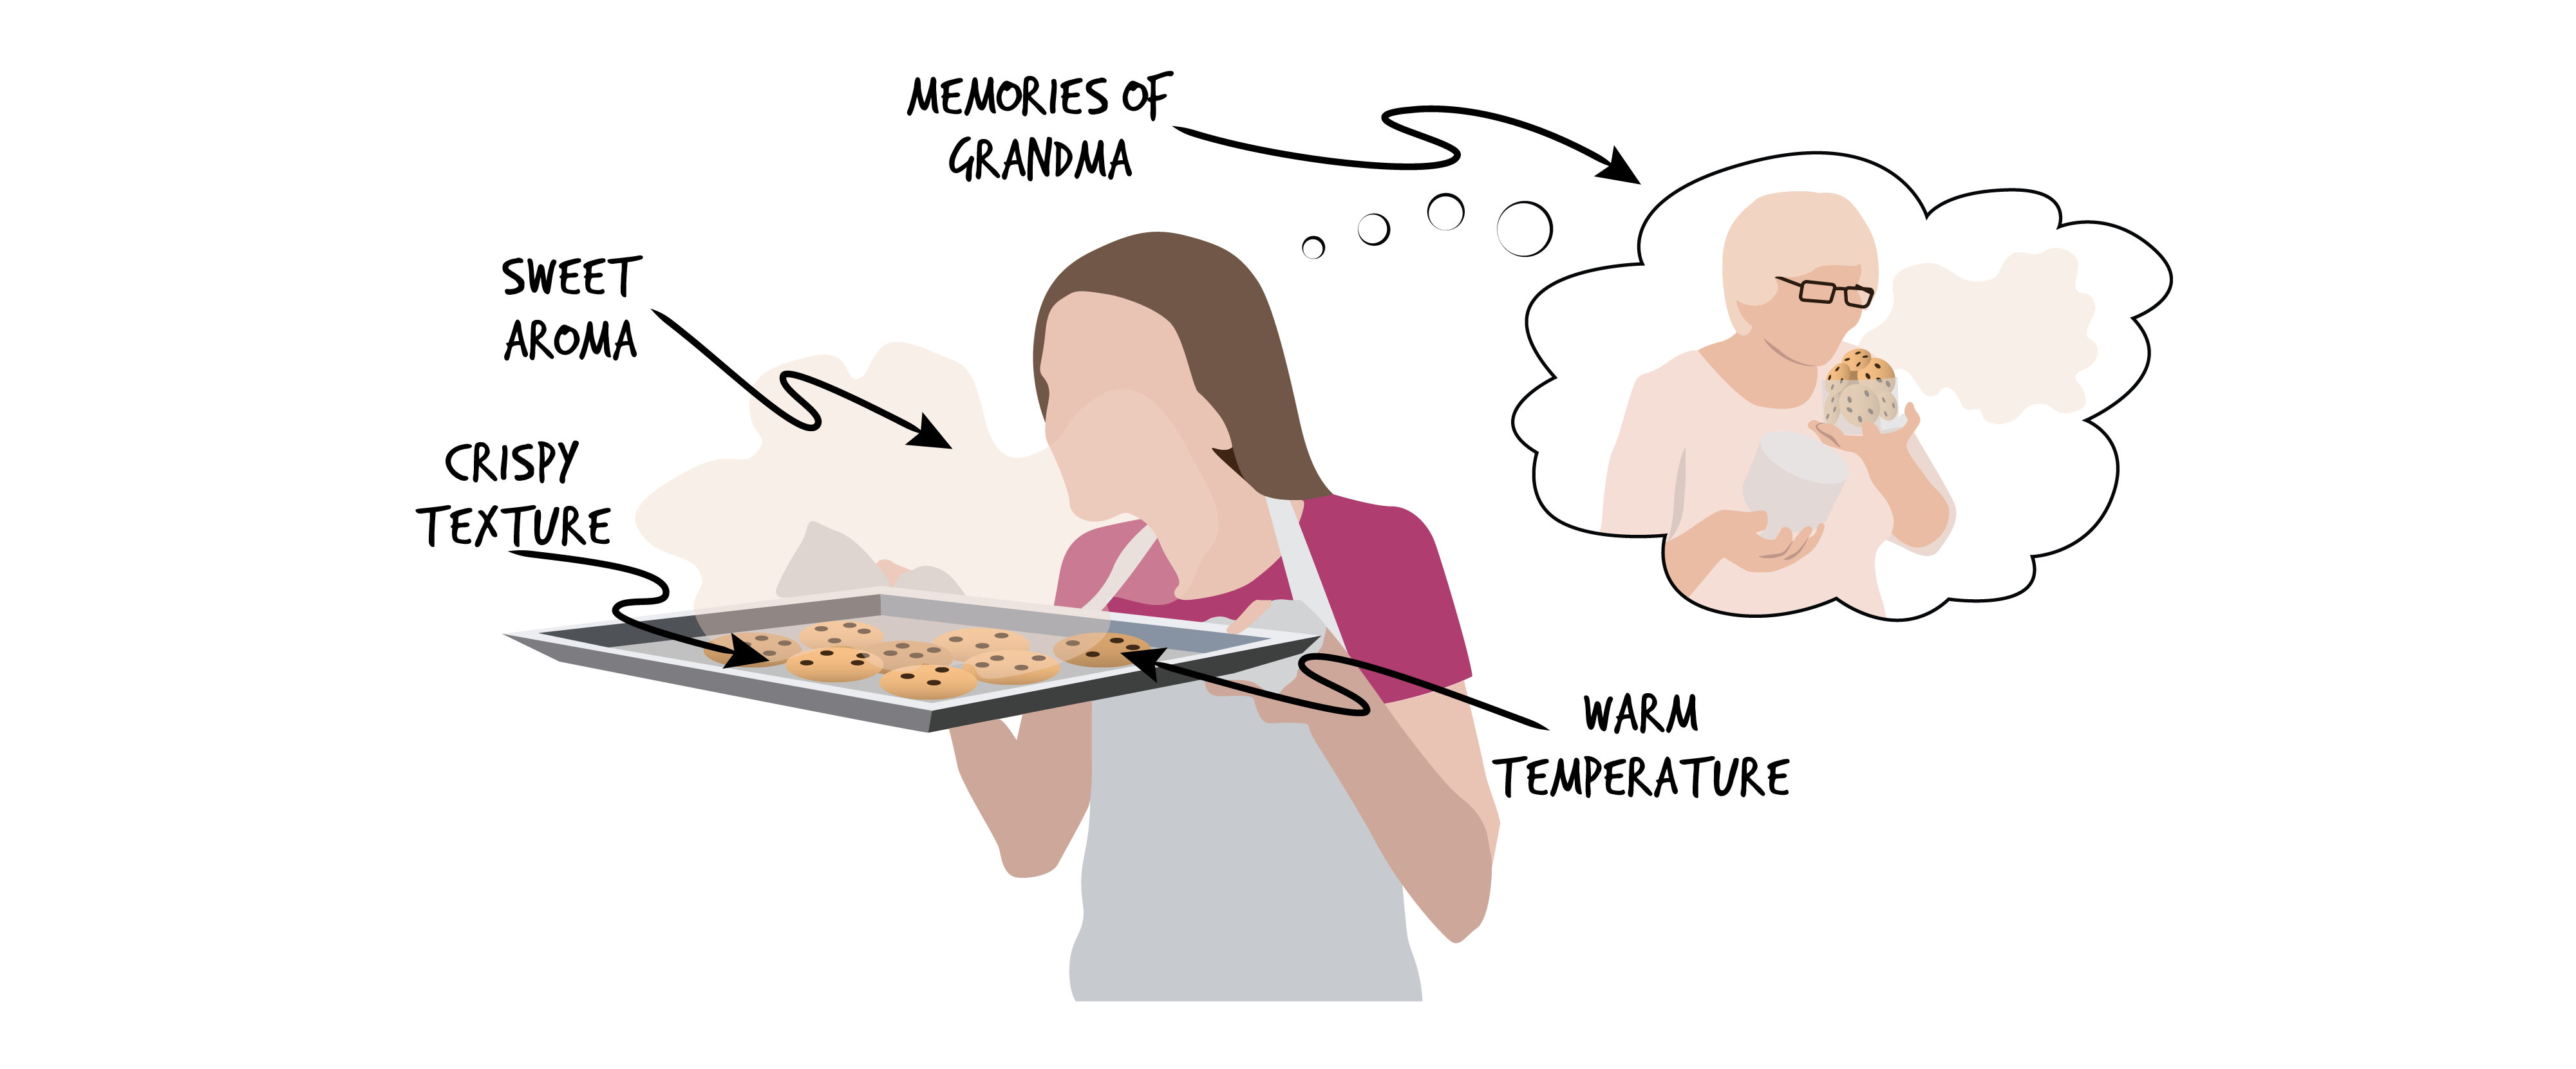 Person in pink shirt and white apron holding a baking sheet with chocolate chip cookies on it. Beige cloud coming from cookies. Text Crispy texture with arrow pointing to cookies. Text Sweet aroma with arrow pointing to beige cloud. Text Memories of grandma with arrow pointing to thought bubble with a grandma eating cookies in it. Text Warm temperature with arrow pointing to baking sheet.